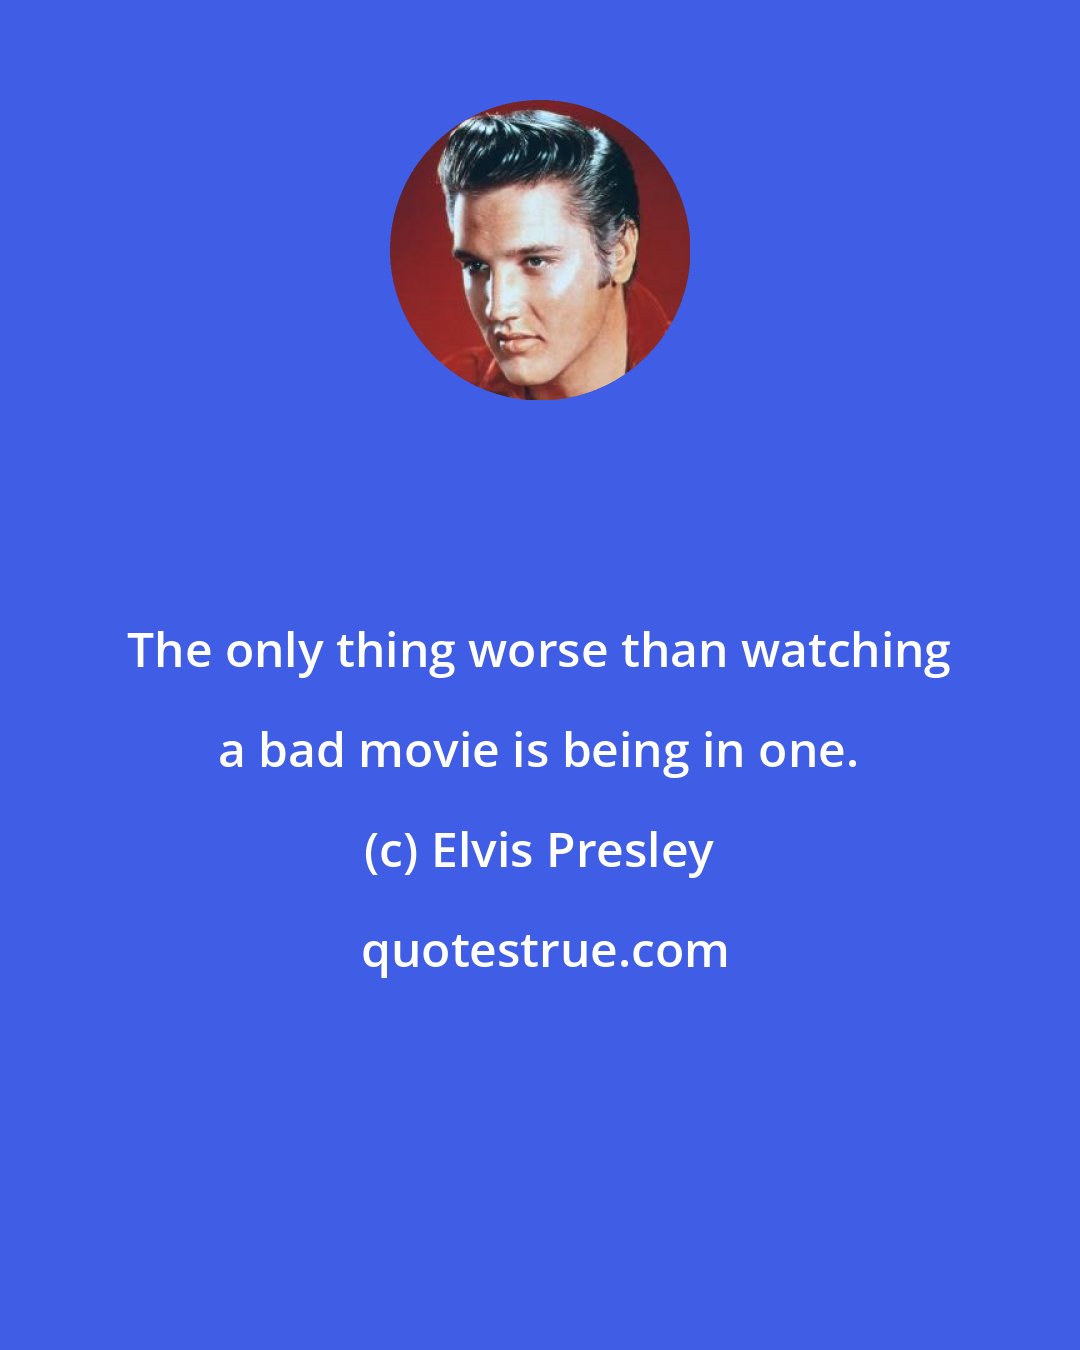 Elvis Presley: The only thing worse than watching a bad movie is being in one.